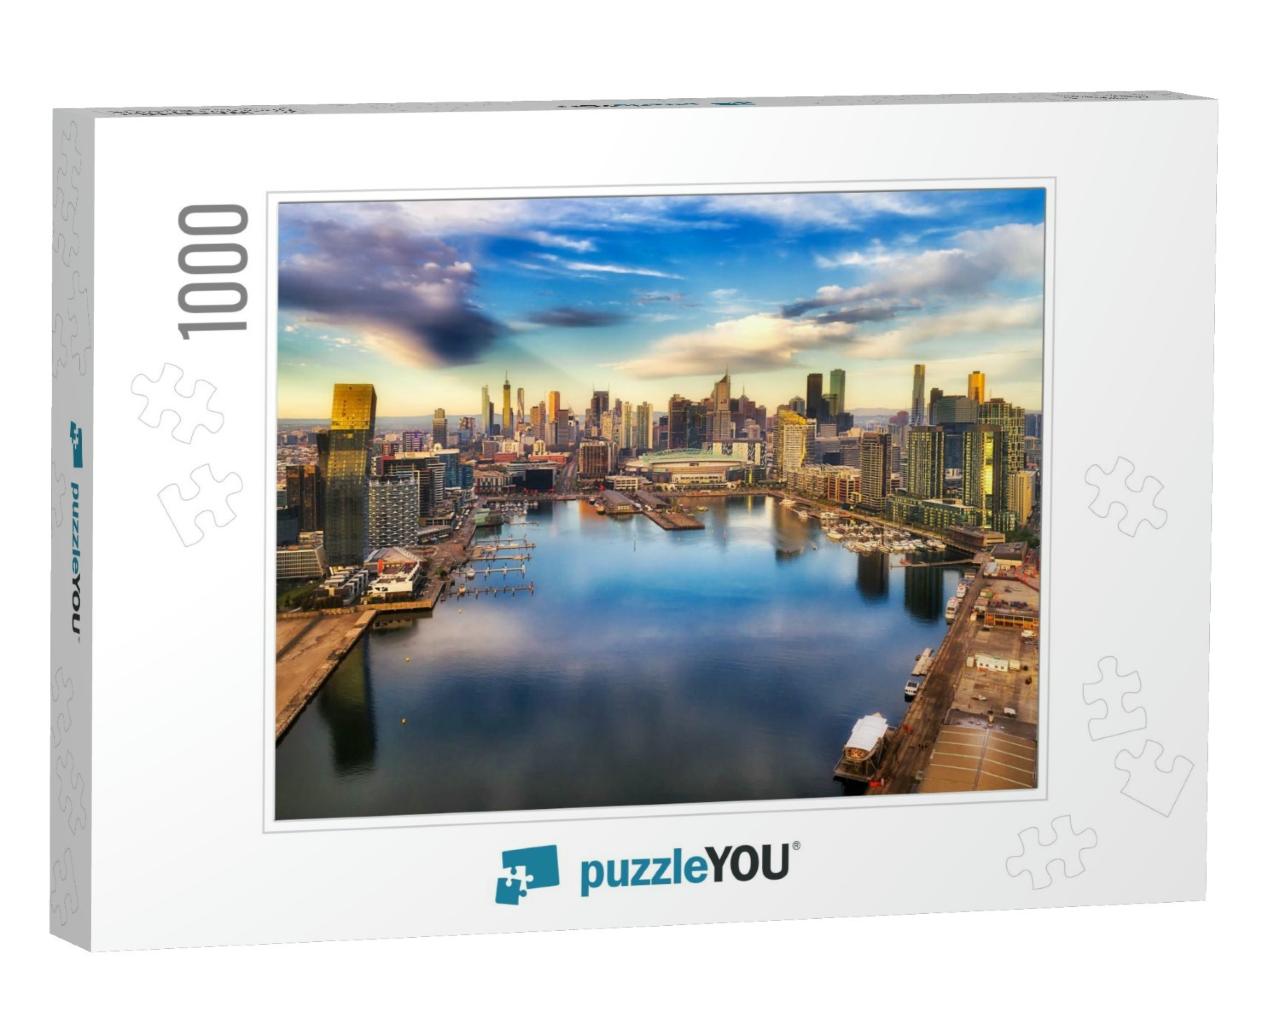 Yarra River Surrounded by Melbourne Suburb Docklands in E... Jigsaw Puzzle with 1000 pieces